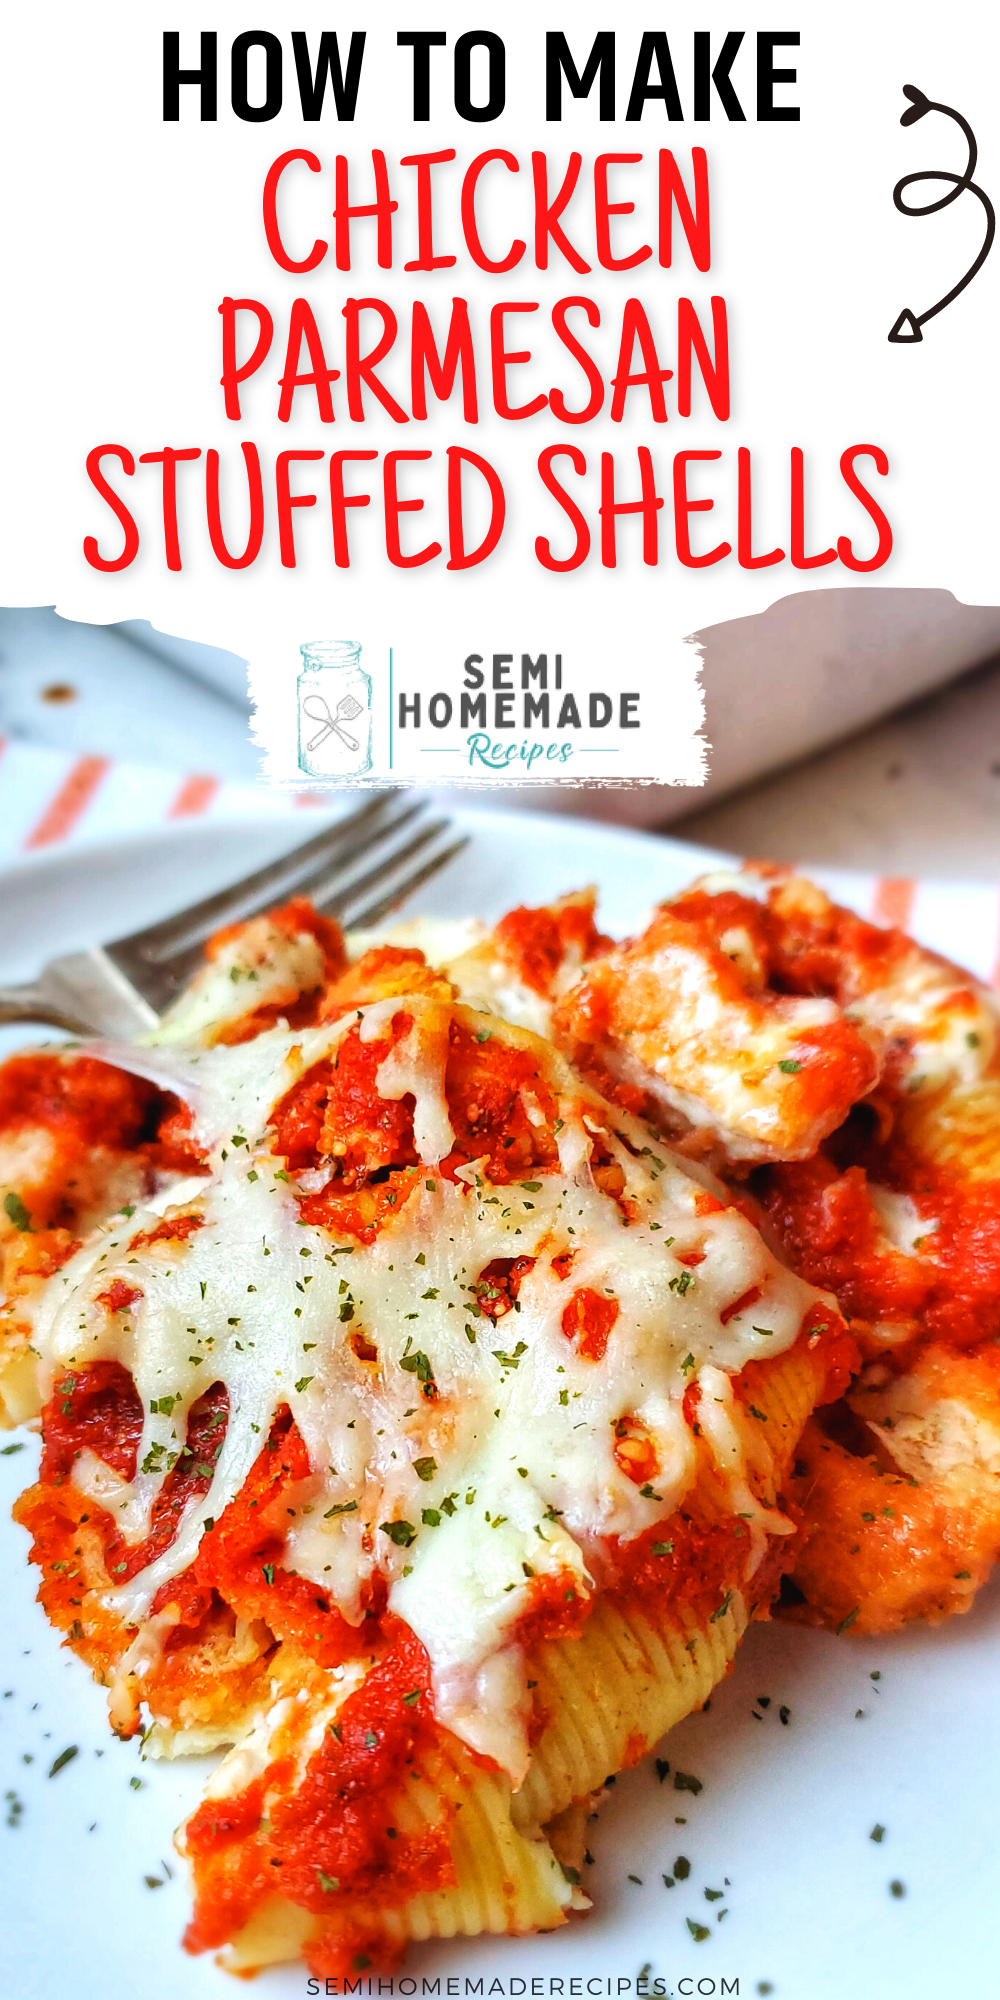 This super easy semi homemade recipe combines tasty Chicken Parmesan and Stuffed Shells to create a perfect Chicken Parmesan Stuffed Shells dinner! 